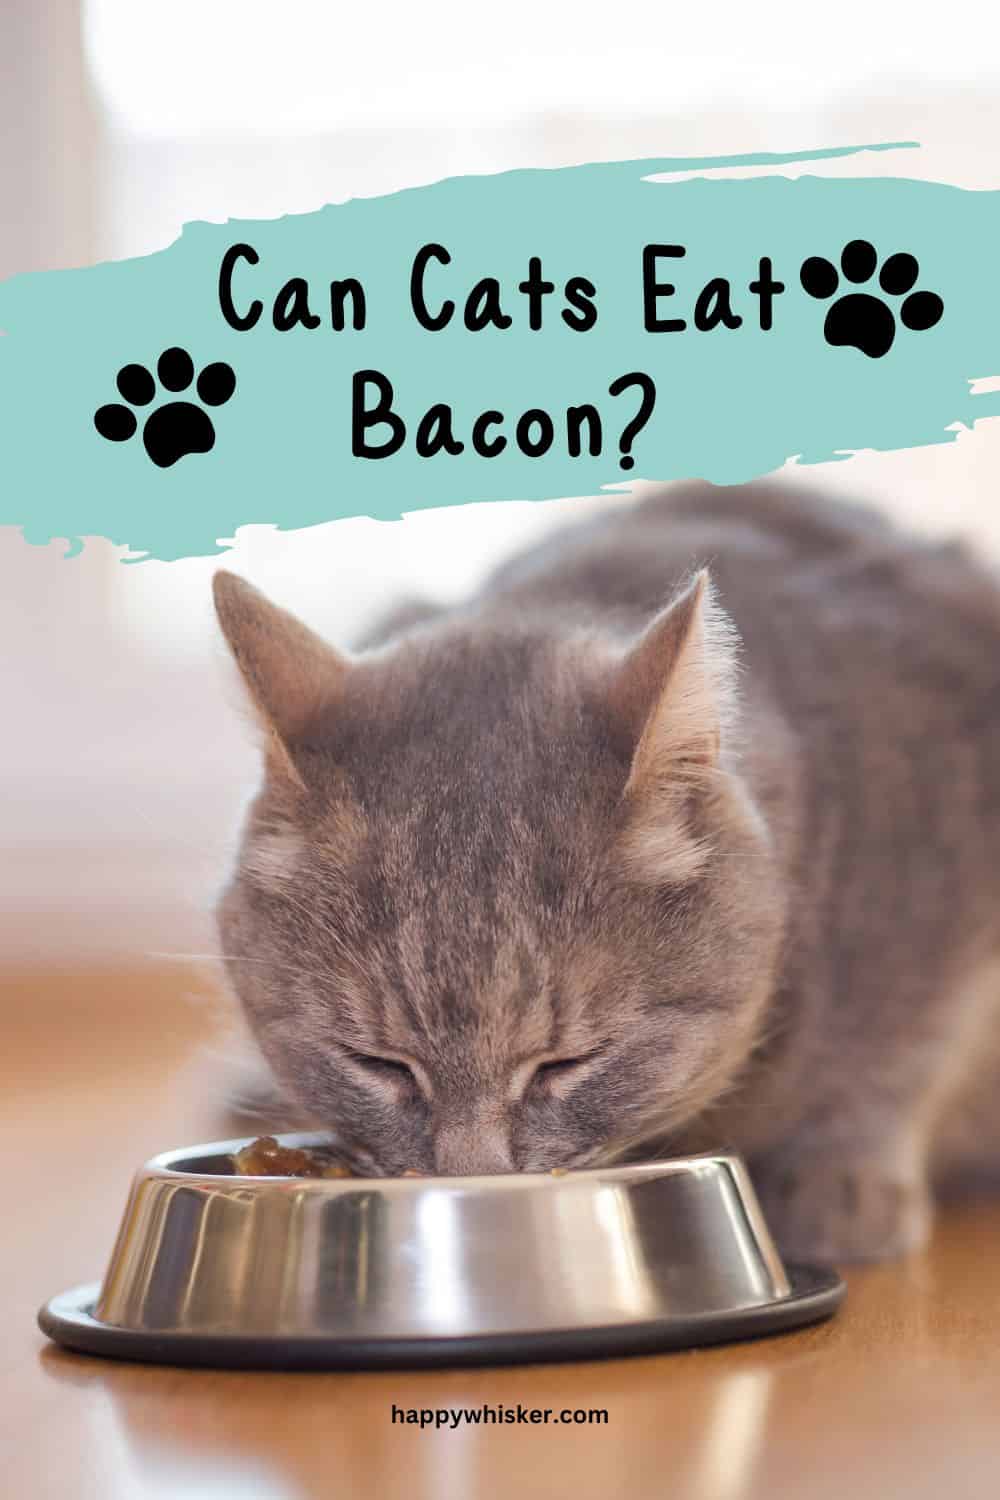 Can Cats Eat Bacon Is It Safe, Are There Any Health Risks